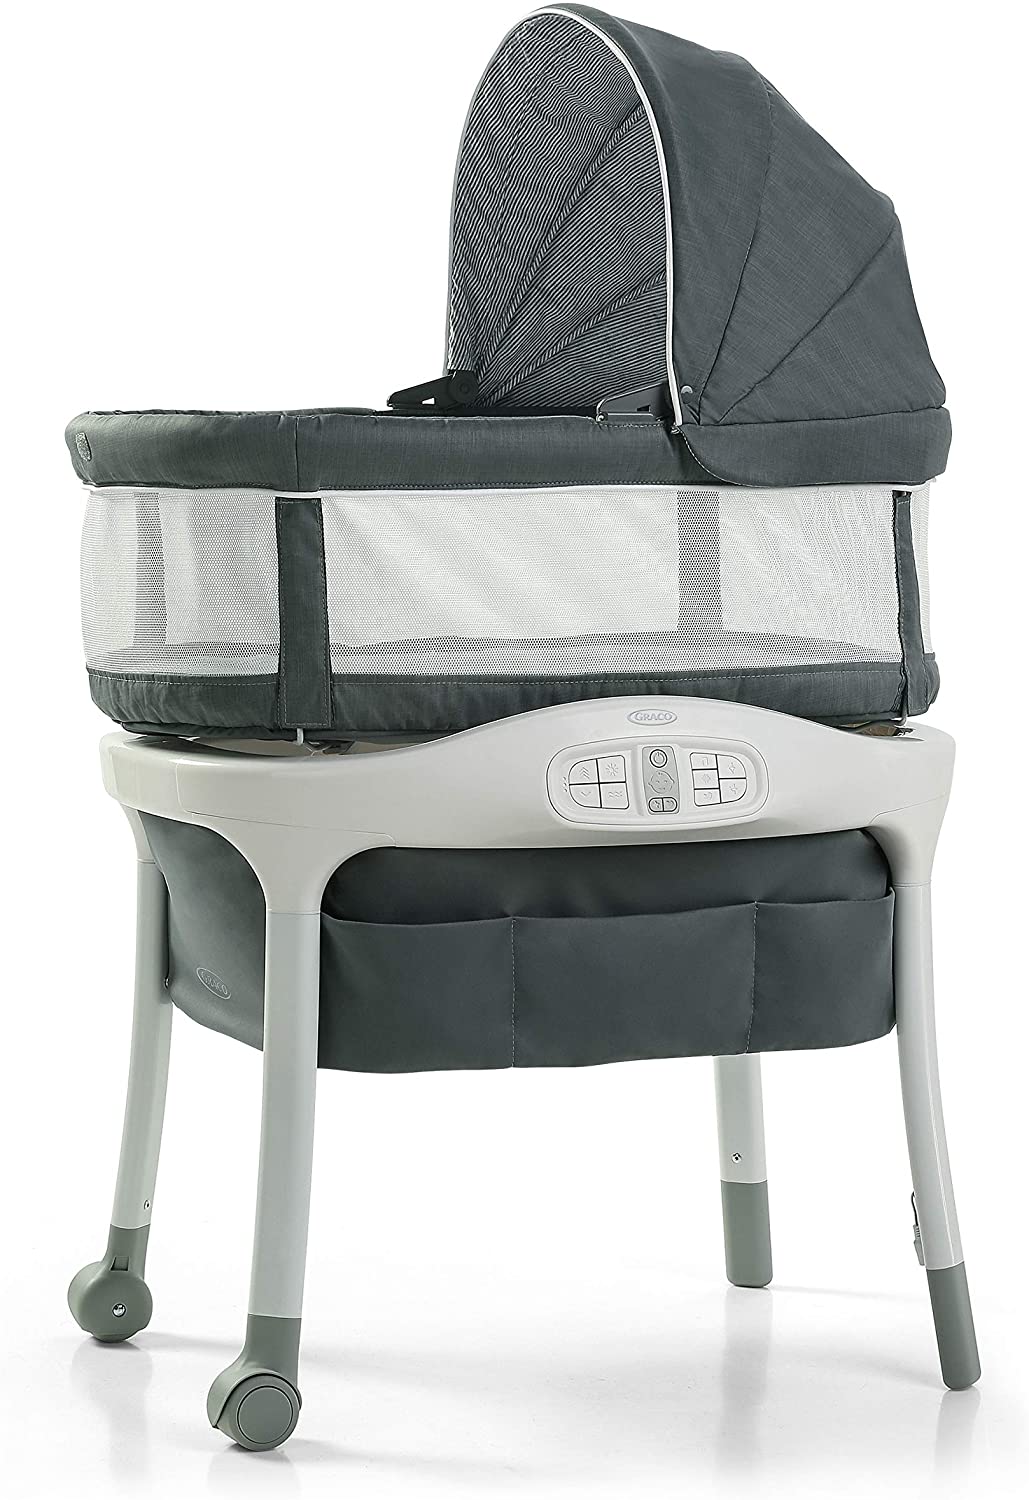 graco sense2snooze bassinet with cry detection technology